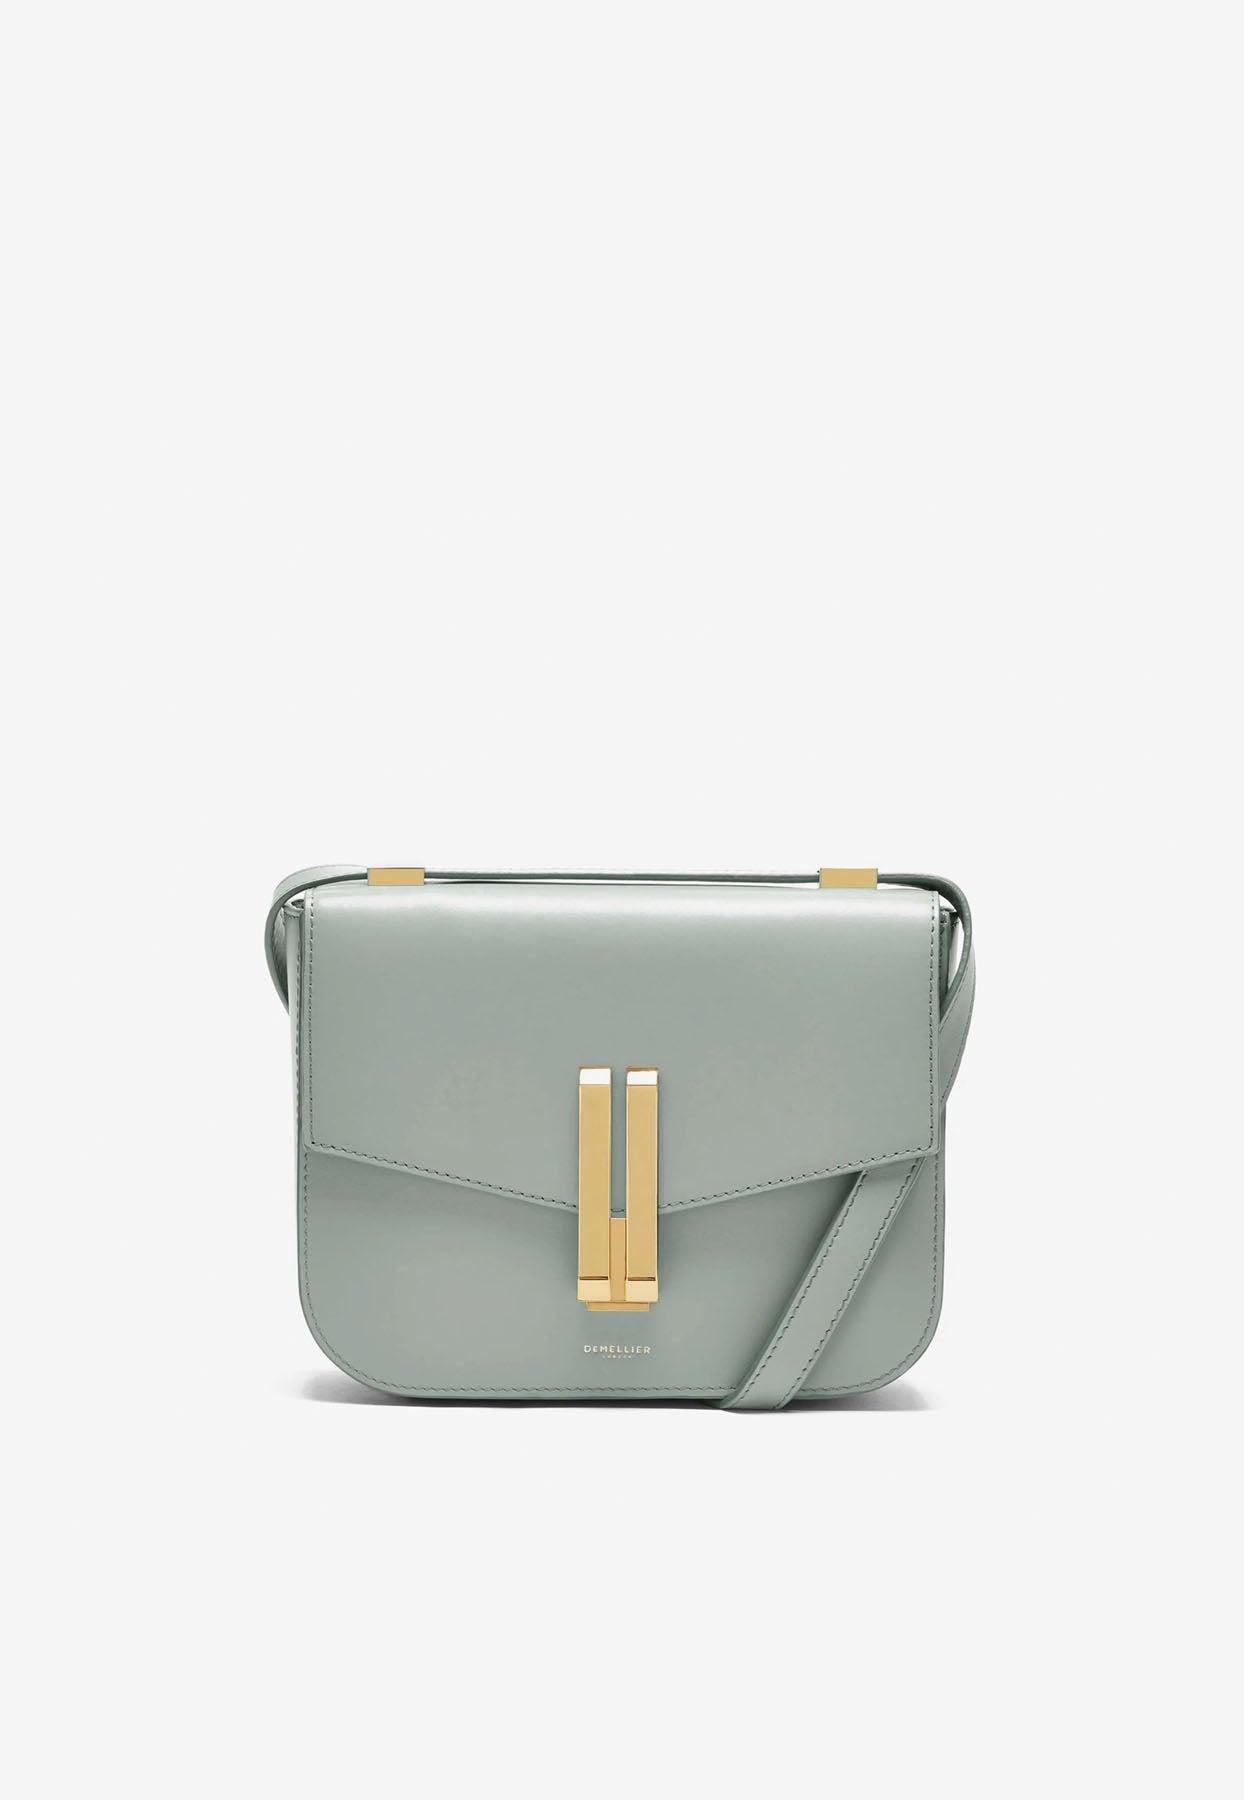 DeMellier London The Vancouver Crossbody Bag In Smooth Leather in